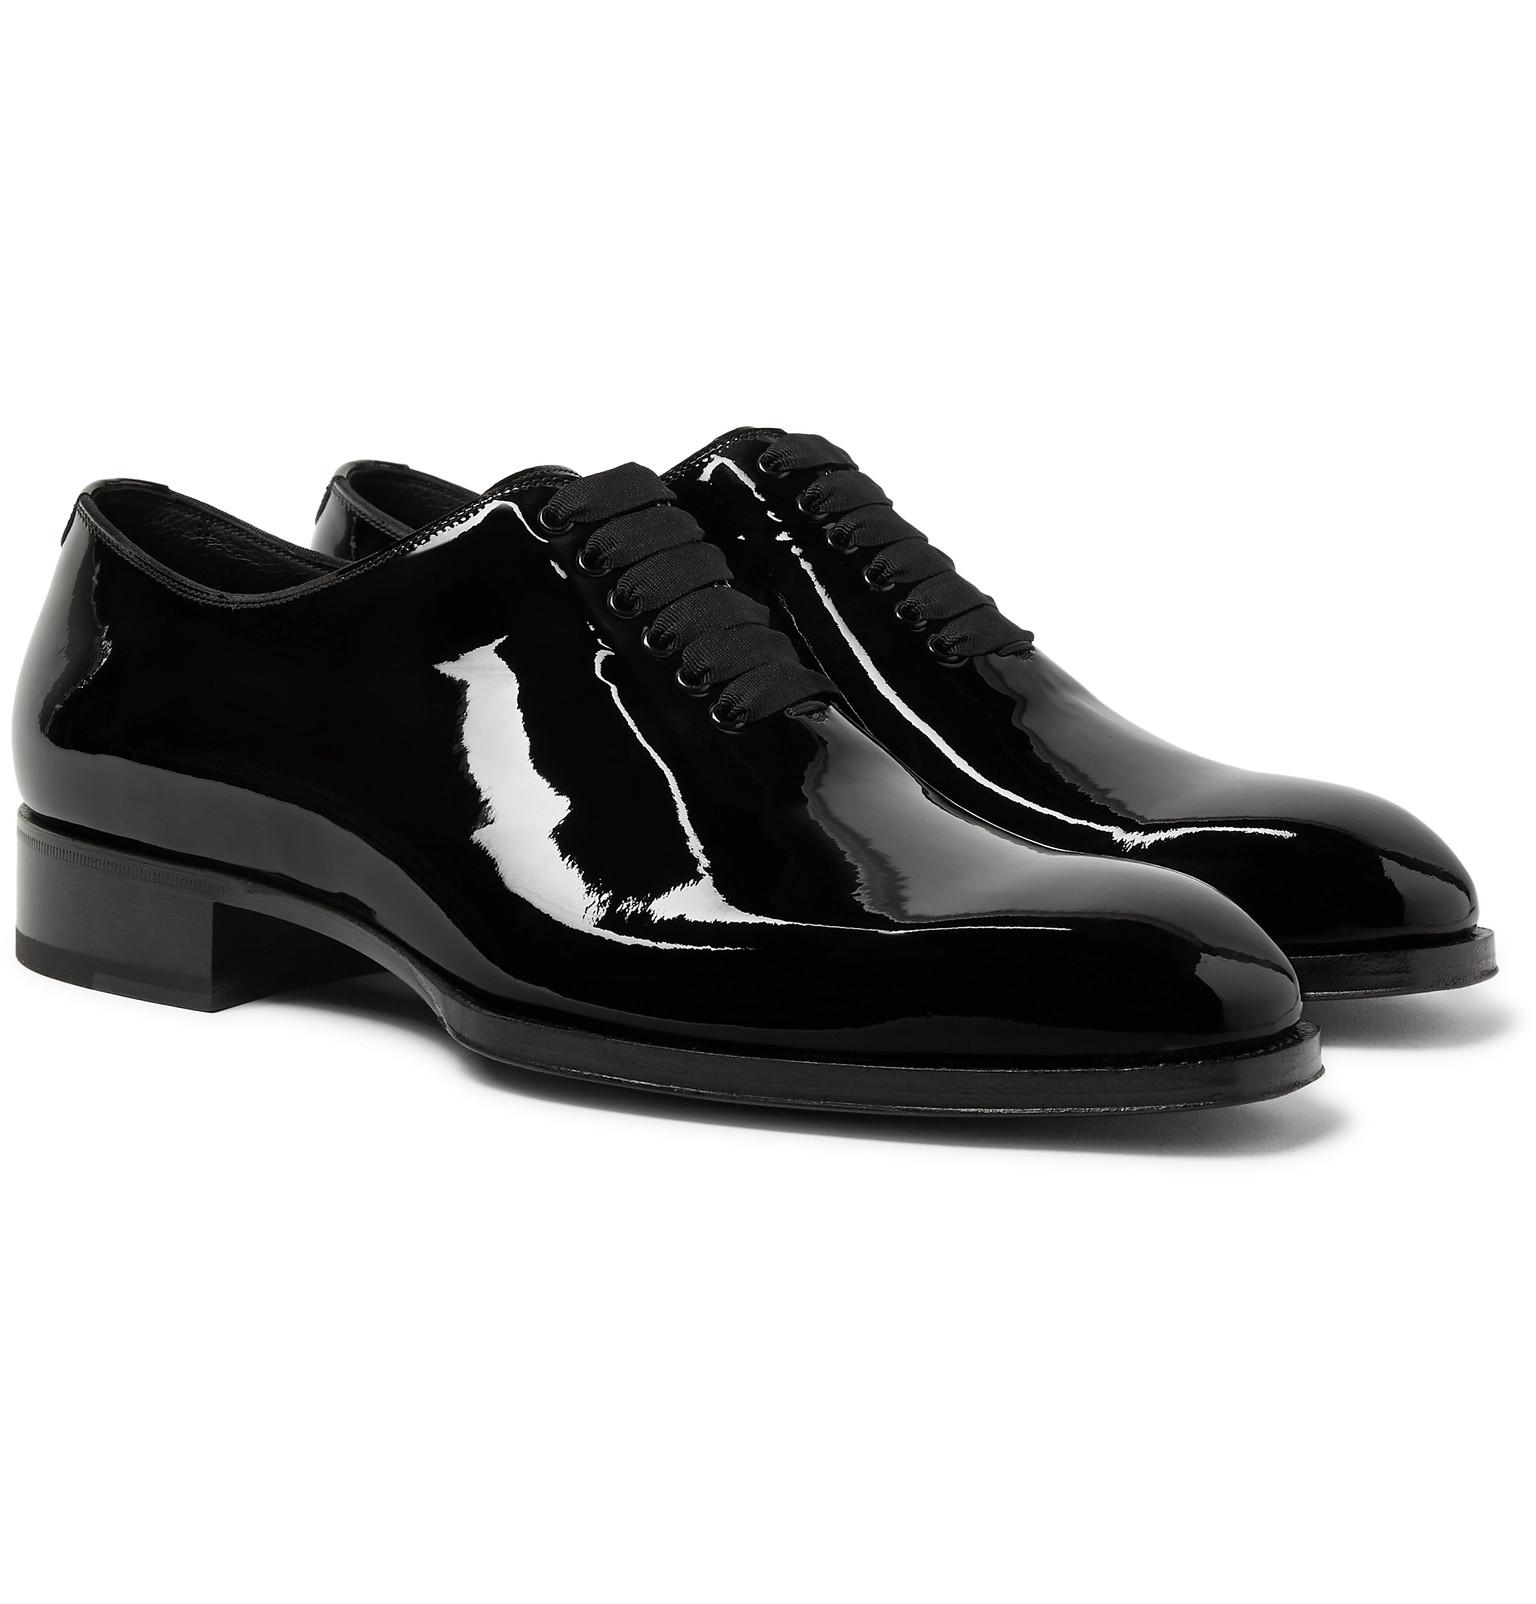 Tom Ford Elkan Wholecut Patentleather Oxford Shoes in Black for Men